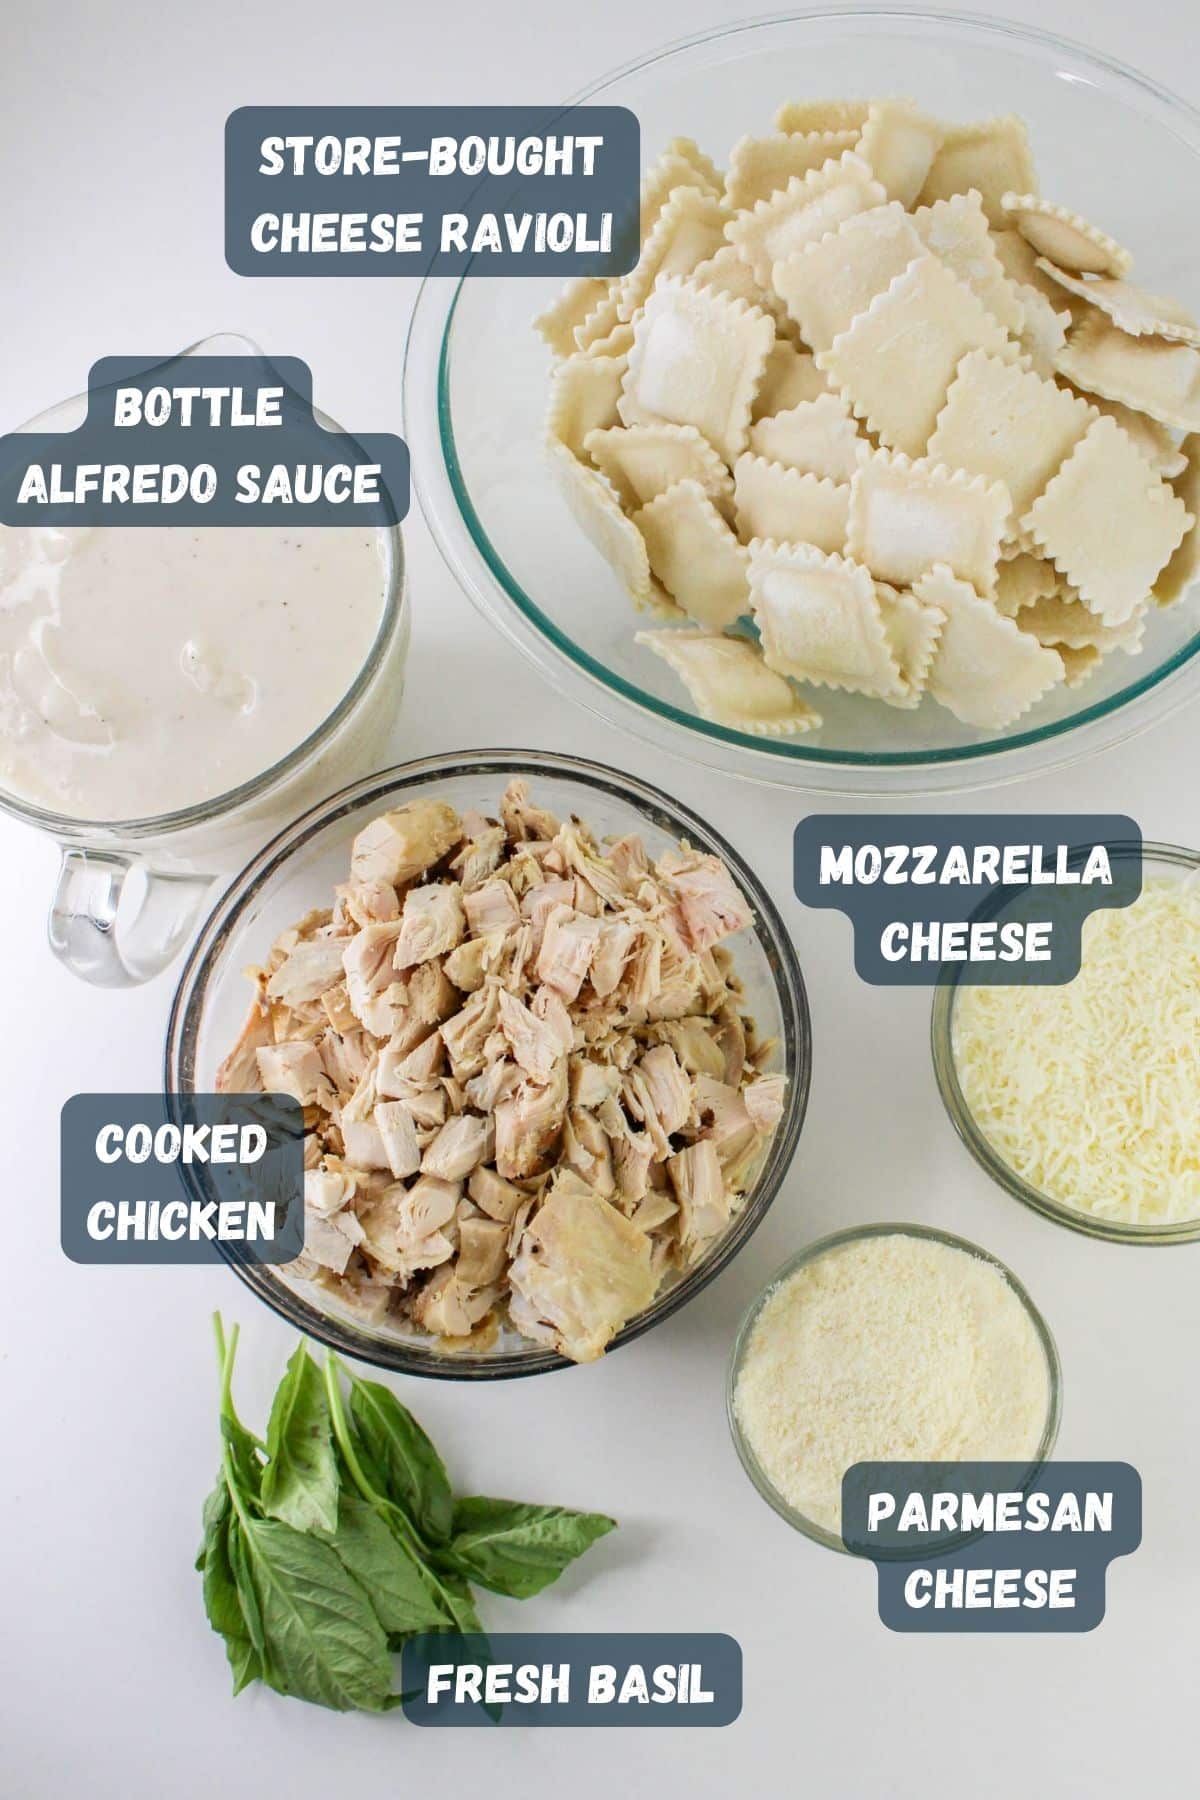 Ingredients for a dish including store-bought cheese ravioli, bottle of Alfredo sauce, cooked chicken, mozzarella cheese, Parmesan cheese, and fresh basil in separate bowls.